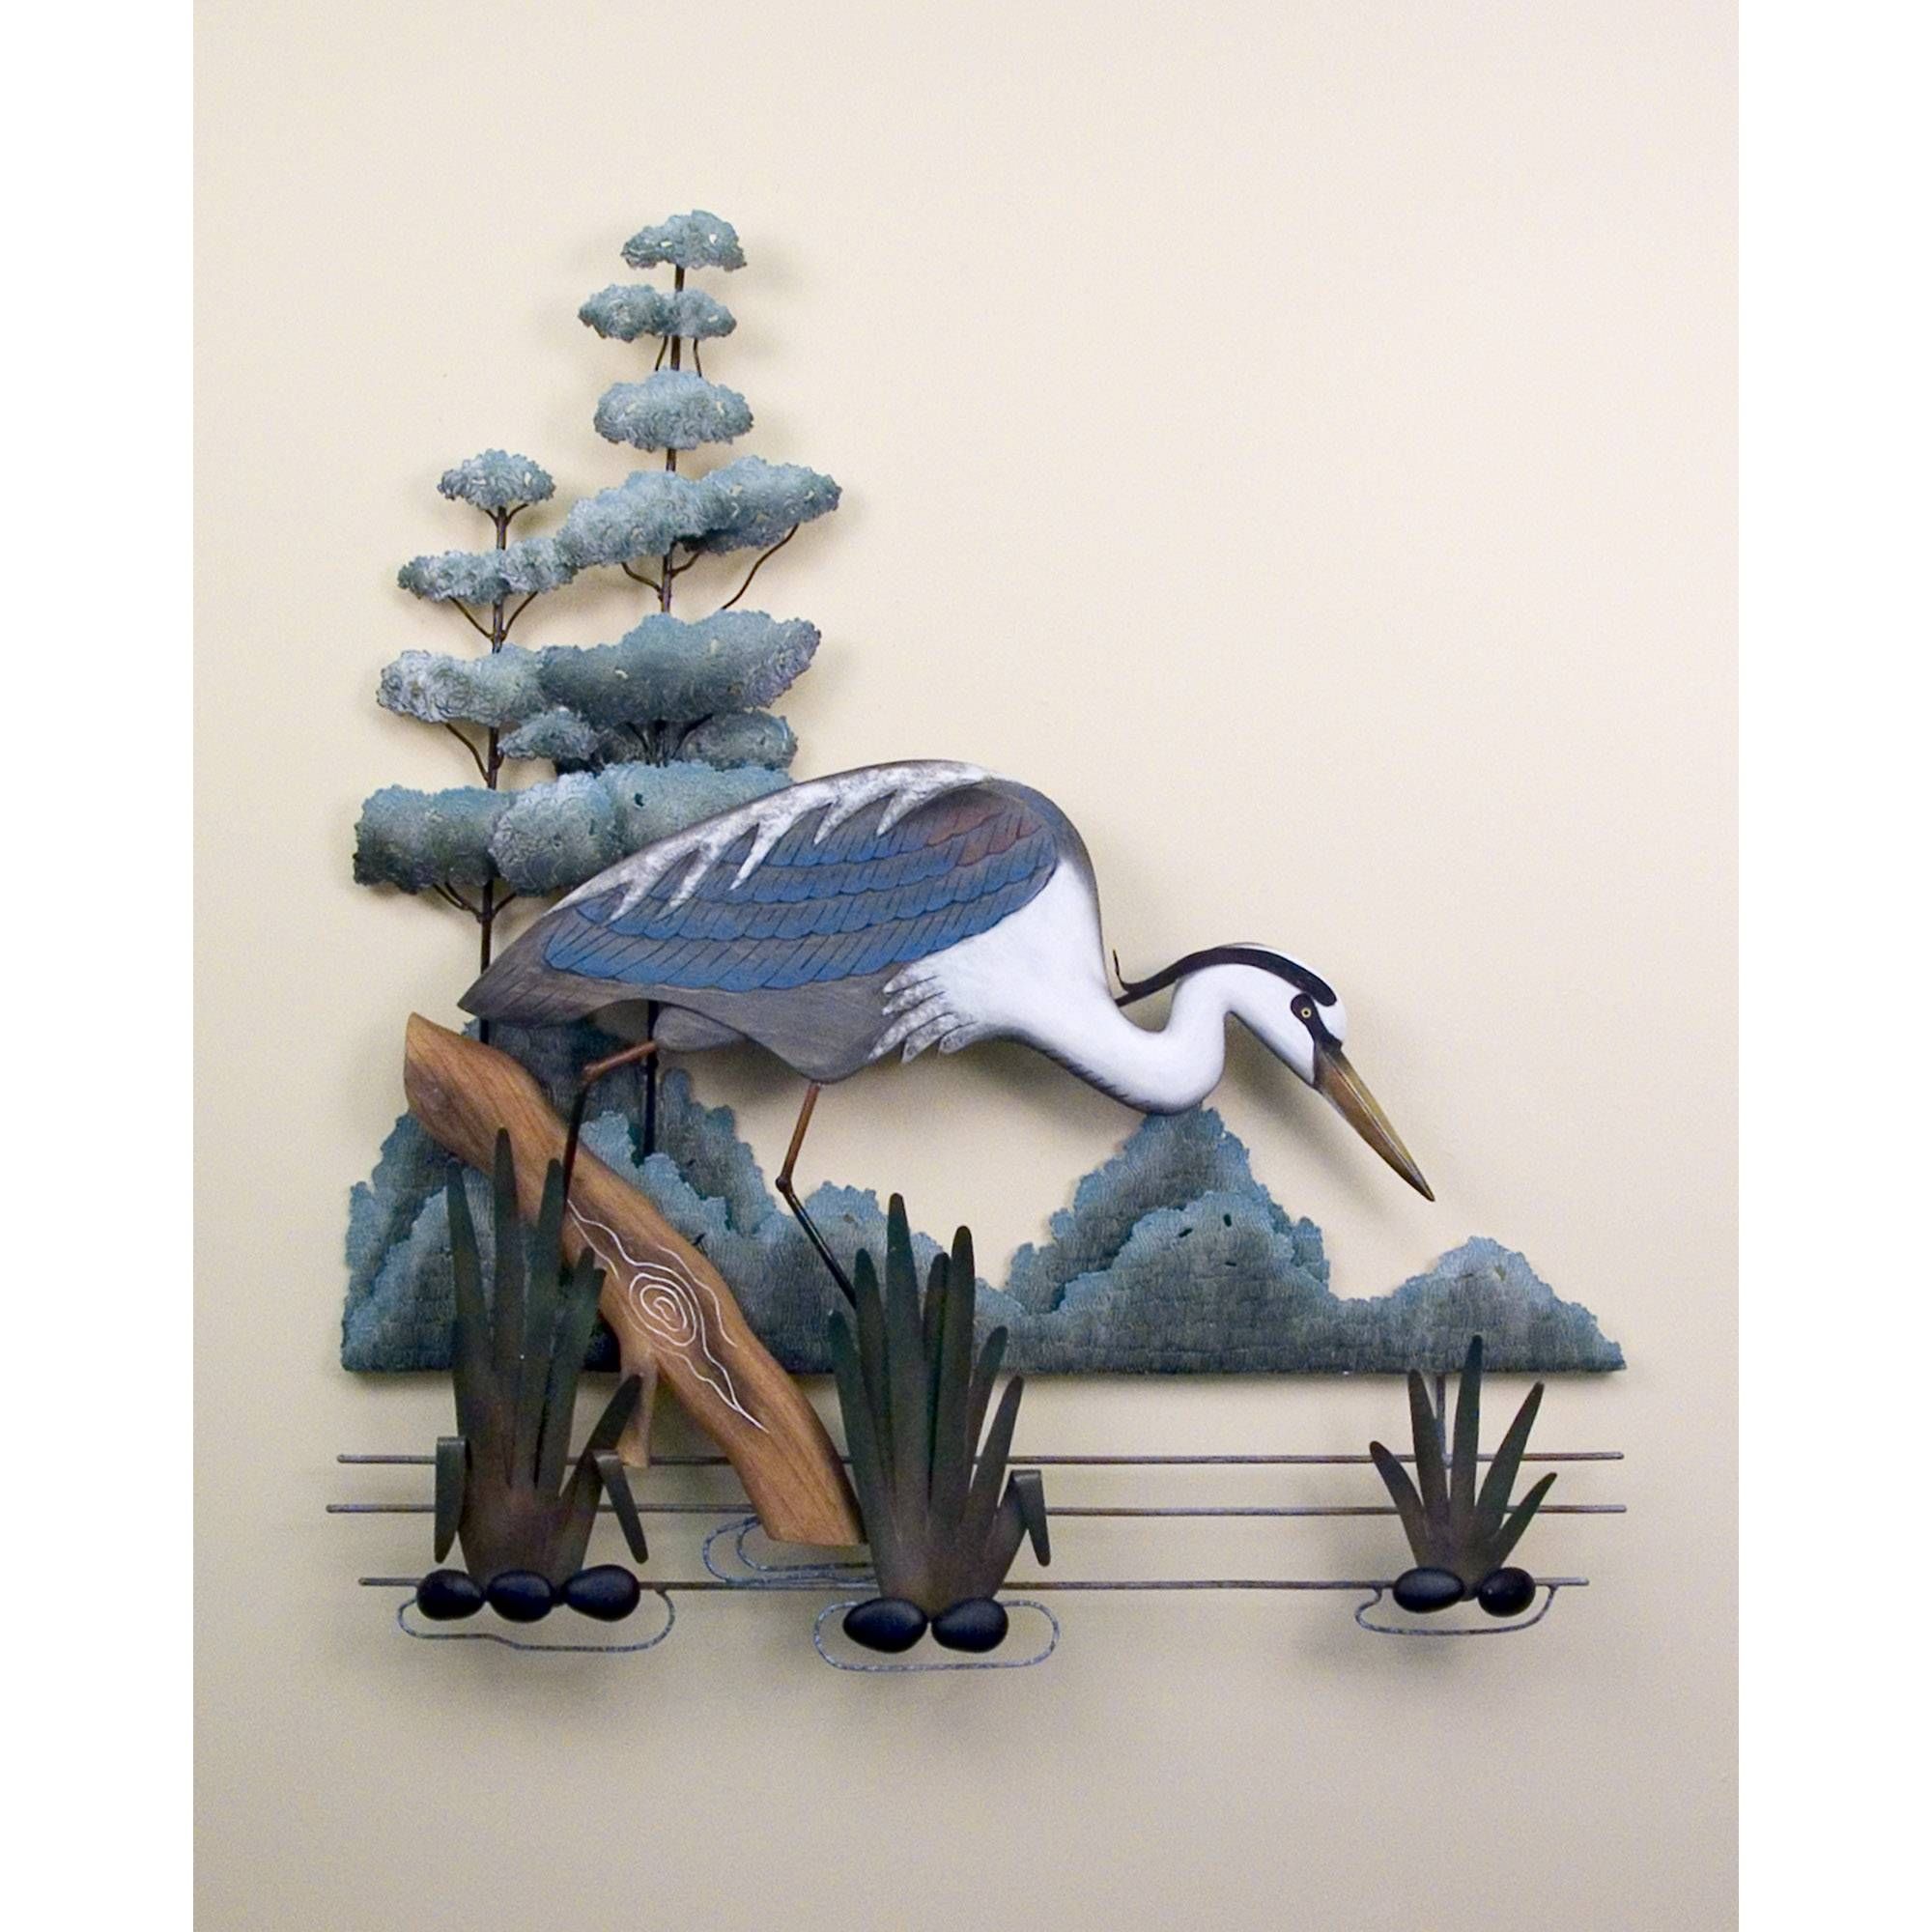 Stalking, Great Blue Heron, Wall Art, Birds, Shore, Tropical Regarding Most Up To Date Tropical Metal Wall Art (View 20 of 20)